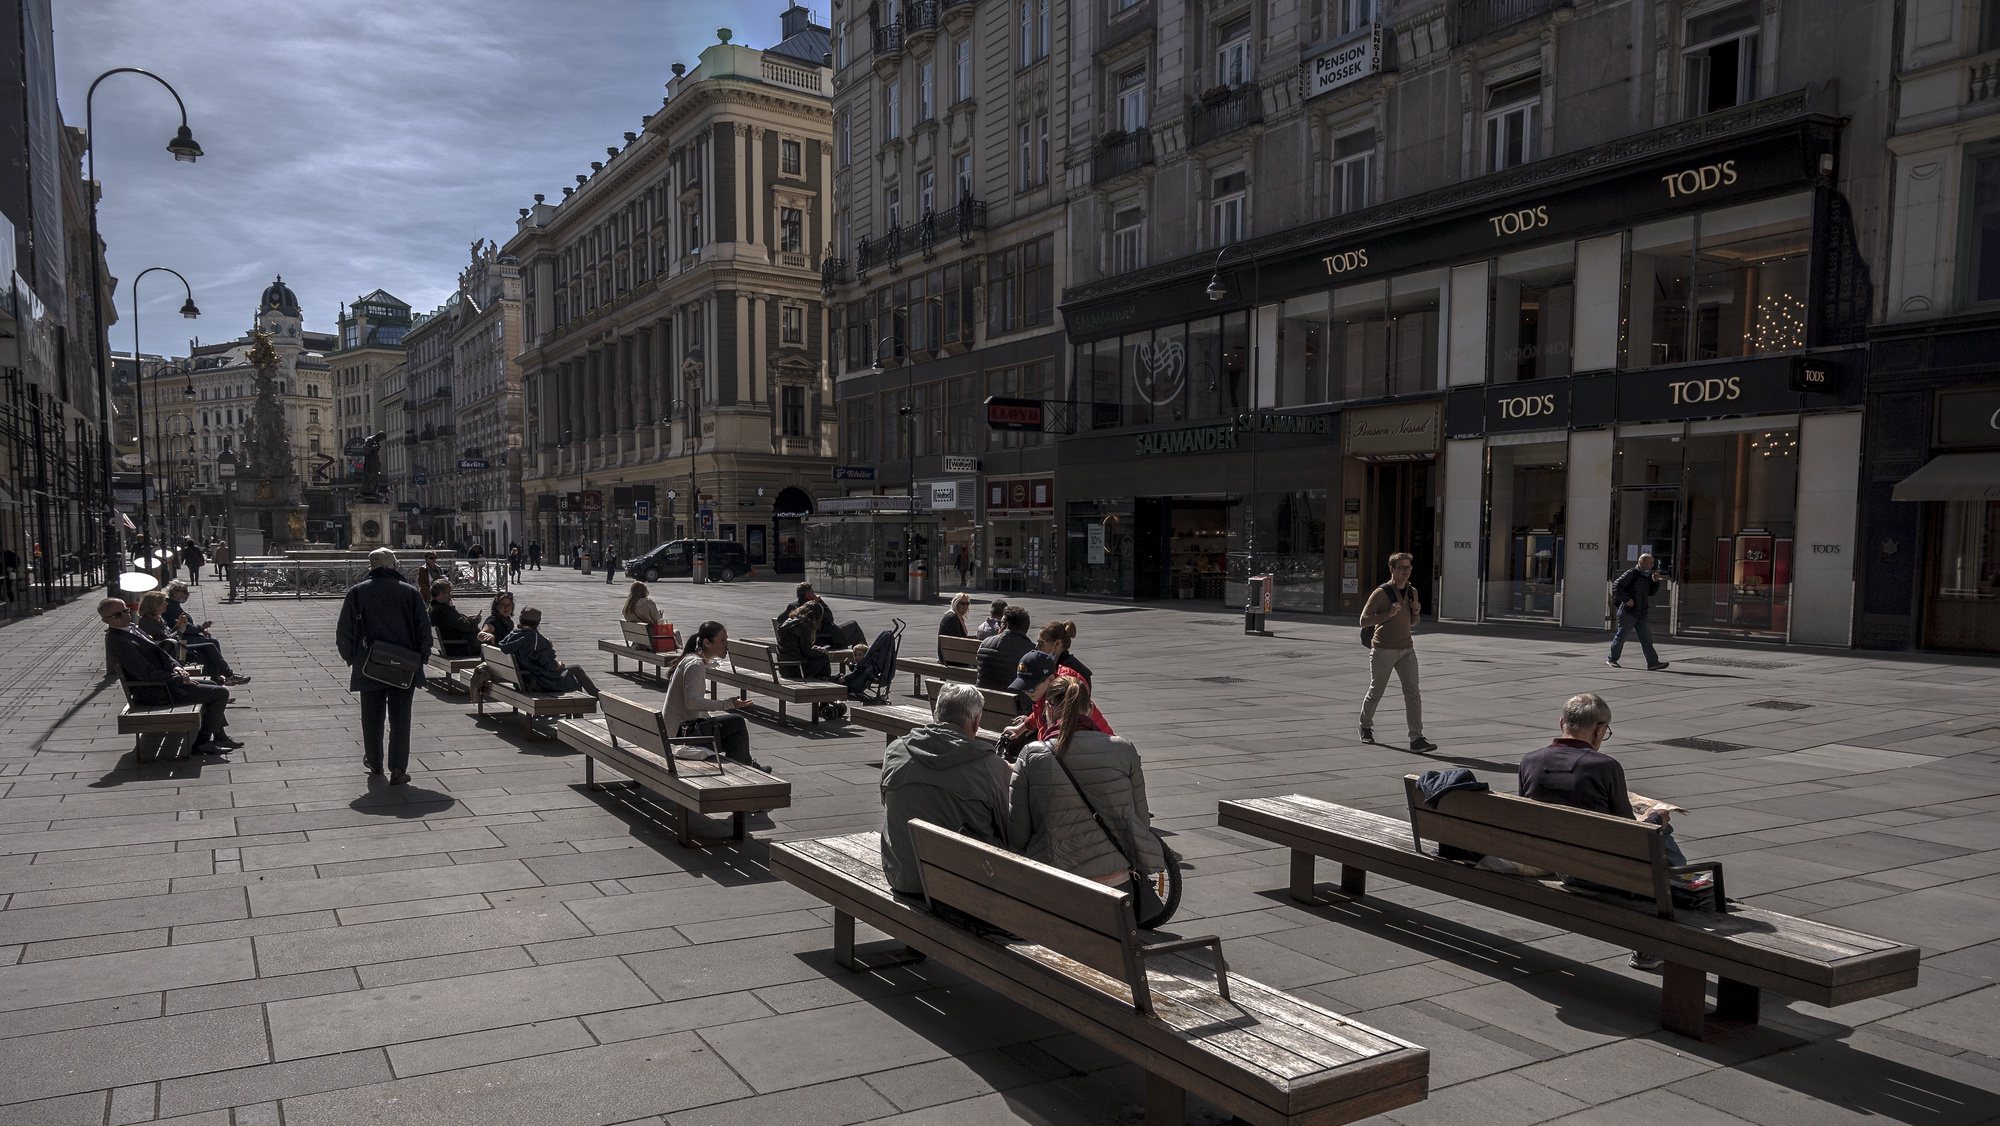 epa08366688 People sit on benches at the Graben shopping street in Vienna, Austria, 16 April 2020. Non essential stores with a shop area under 400 square meters, hardware stores, garden centres and federal parks are allowed to reopen under strict safety measures to slow down the ongoing pandemic of the COVID-19 disease caused by the SARS-CoV-2 coronavirus since 14 April 2020. The government has ordered to wear face masks in supermarkets, pharmacies, various kind of opened shops, public transportation and car pools.  EPA/CHRISTIAN BRUNA